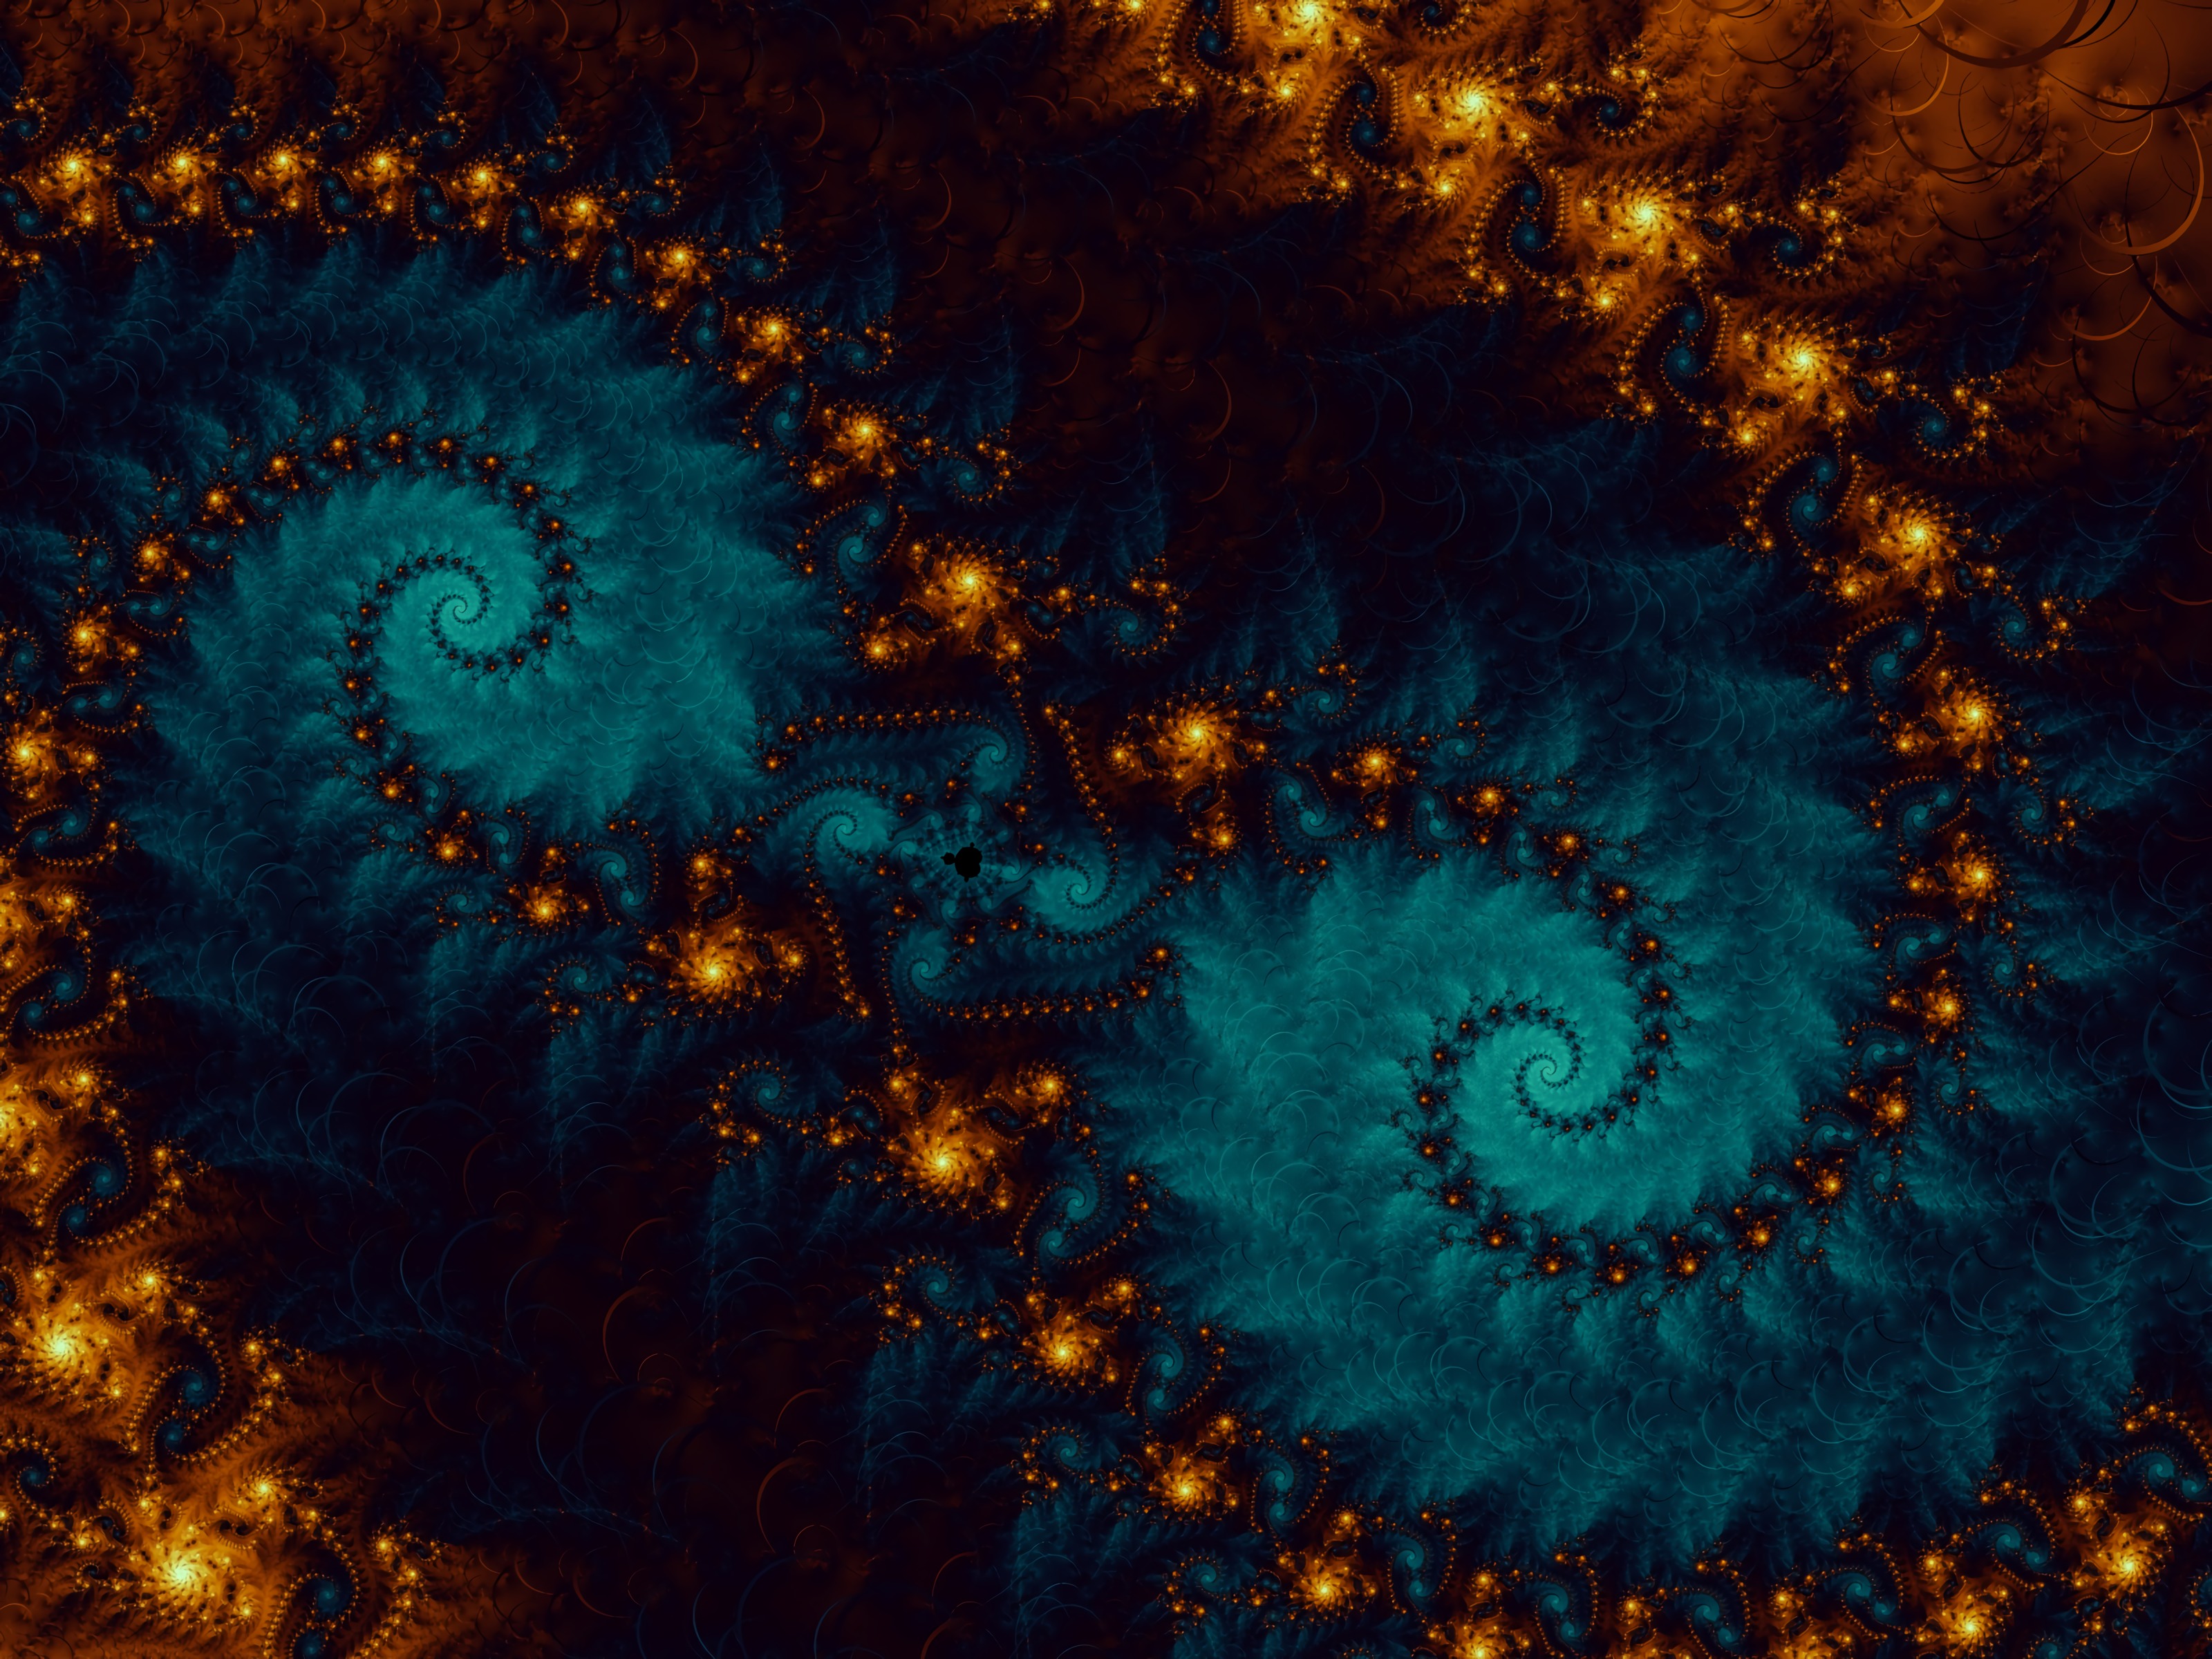 fractal, abstract, pattern, spiral, swirling, involute images